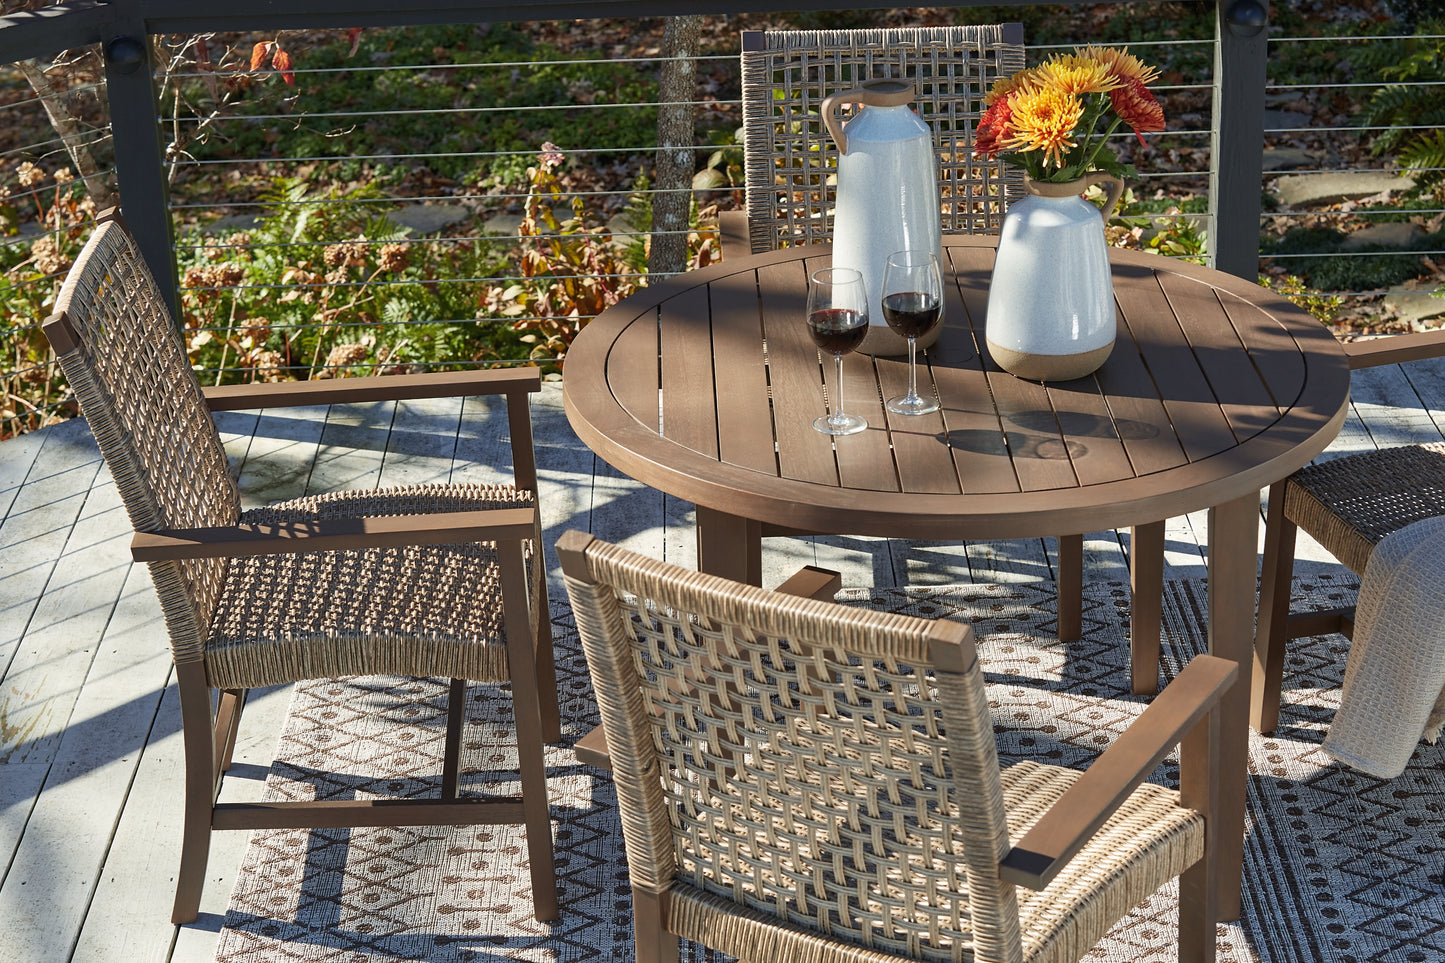 Ashley Express - Germalia Outdoor Dining Table and 4 Chairs